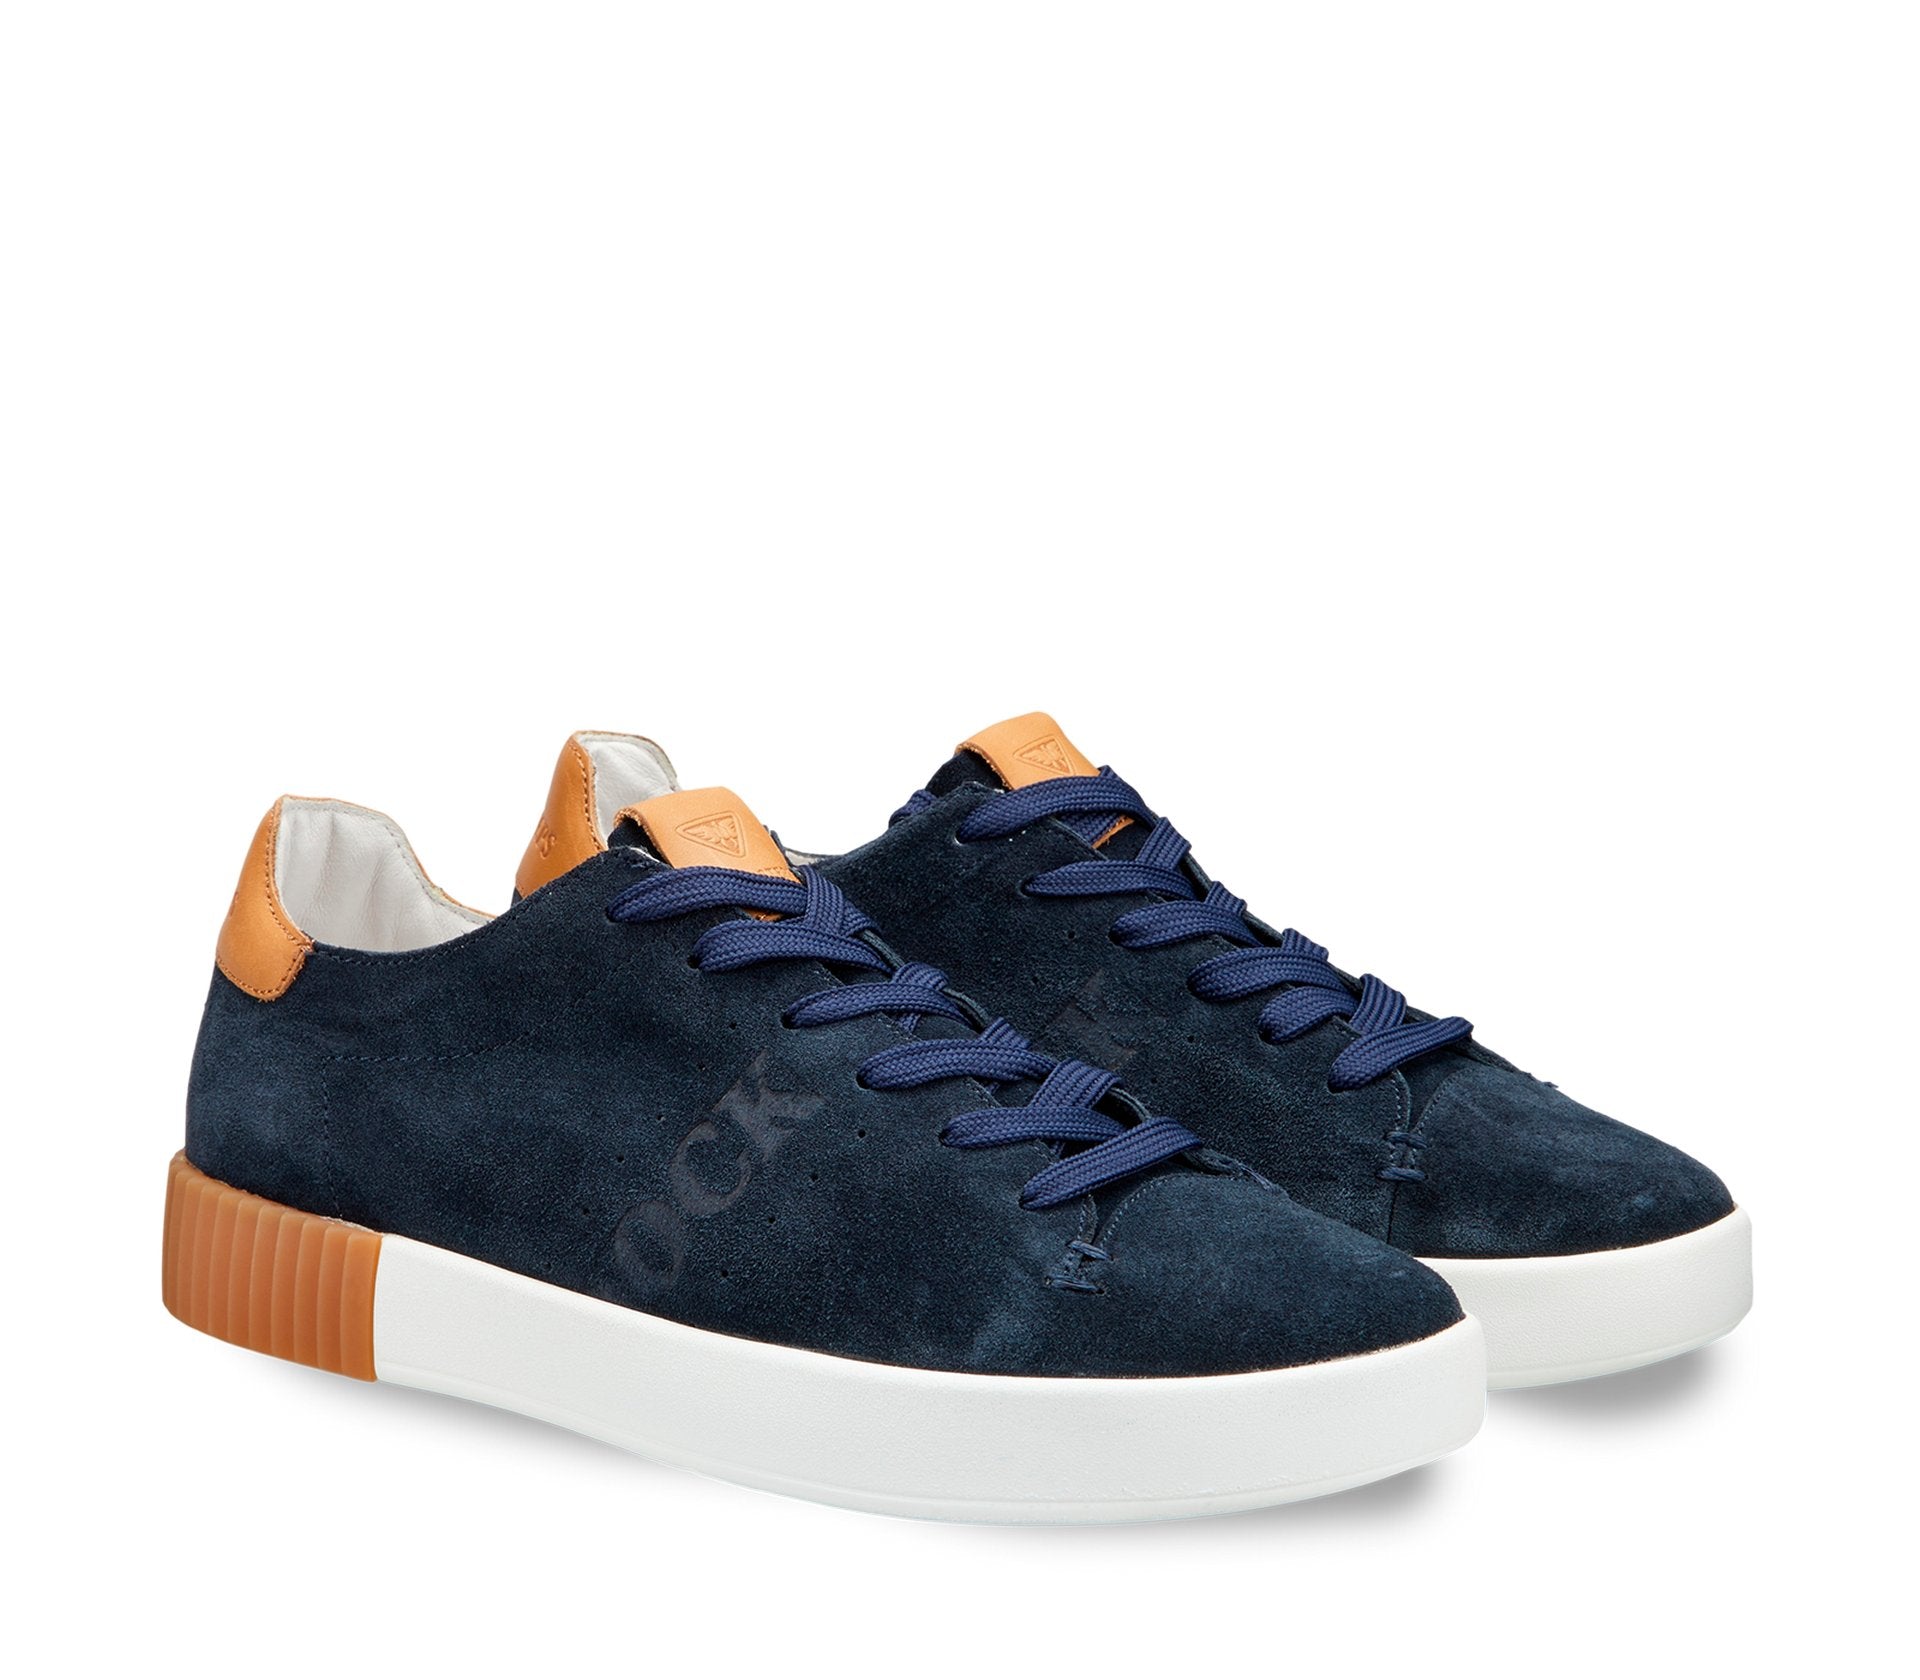 Docksteps men's mixed leather/suede trainers